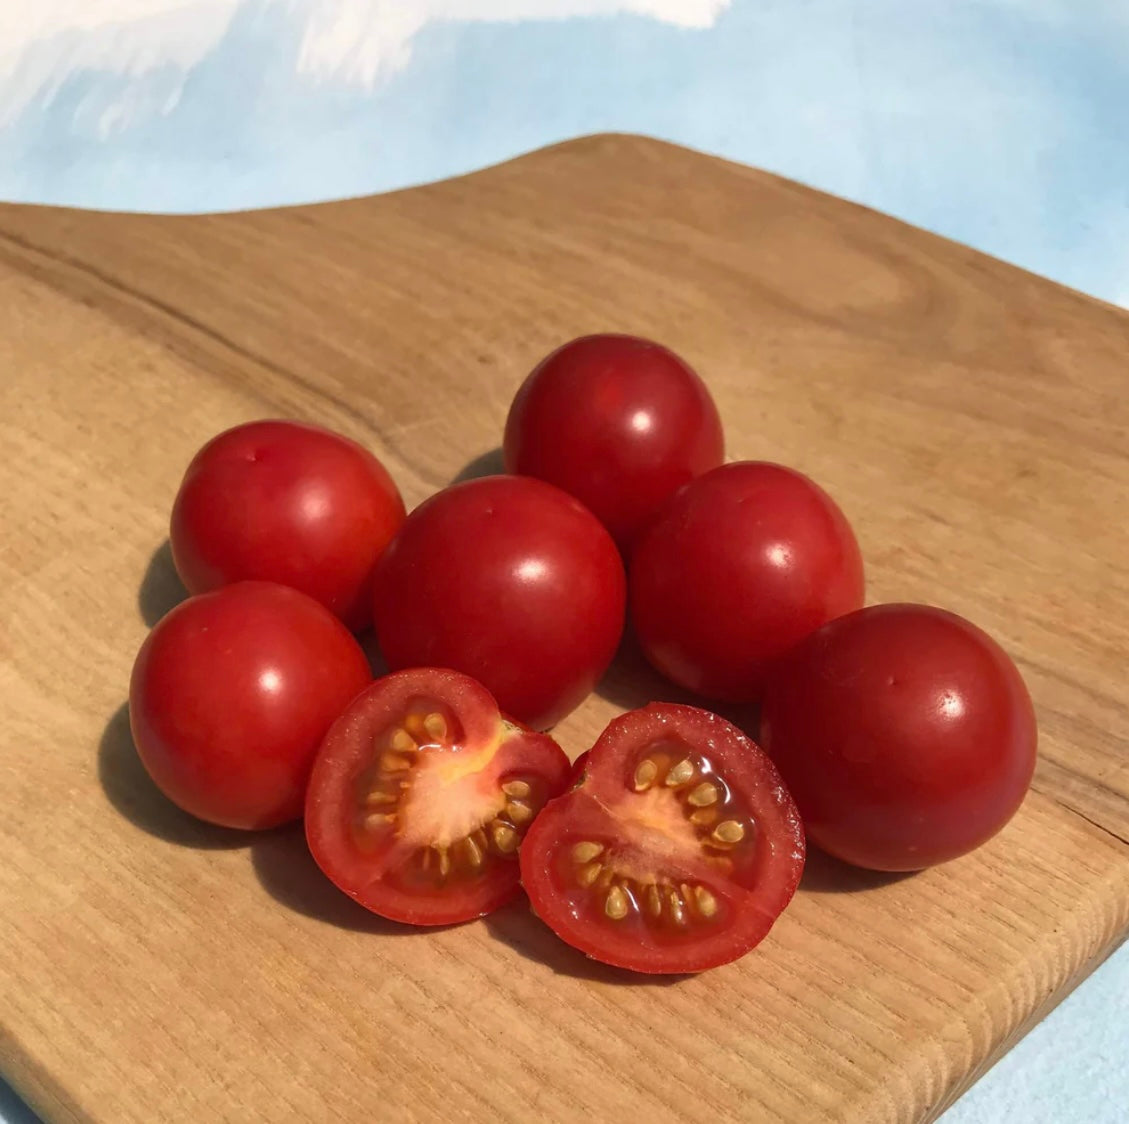 hudson valley fox cherry tomato seeds seed from flower + furbish Shop now at flower + furbish